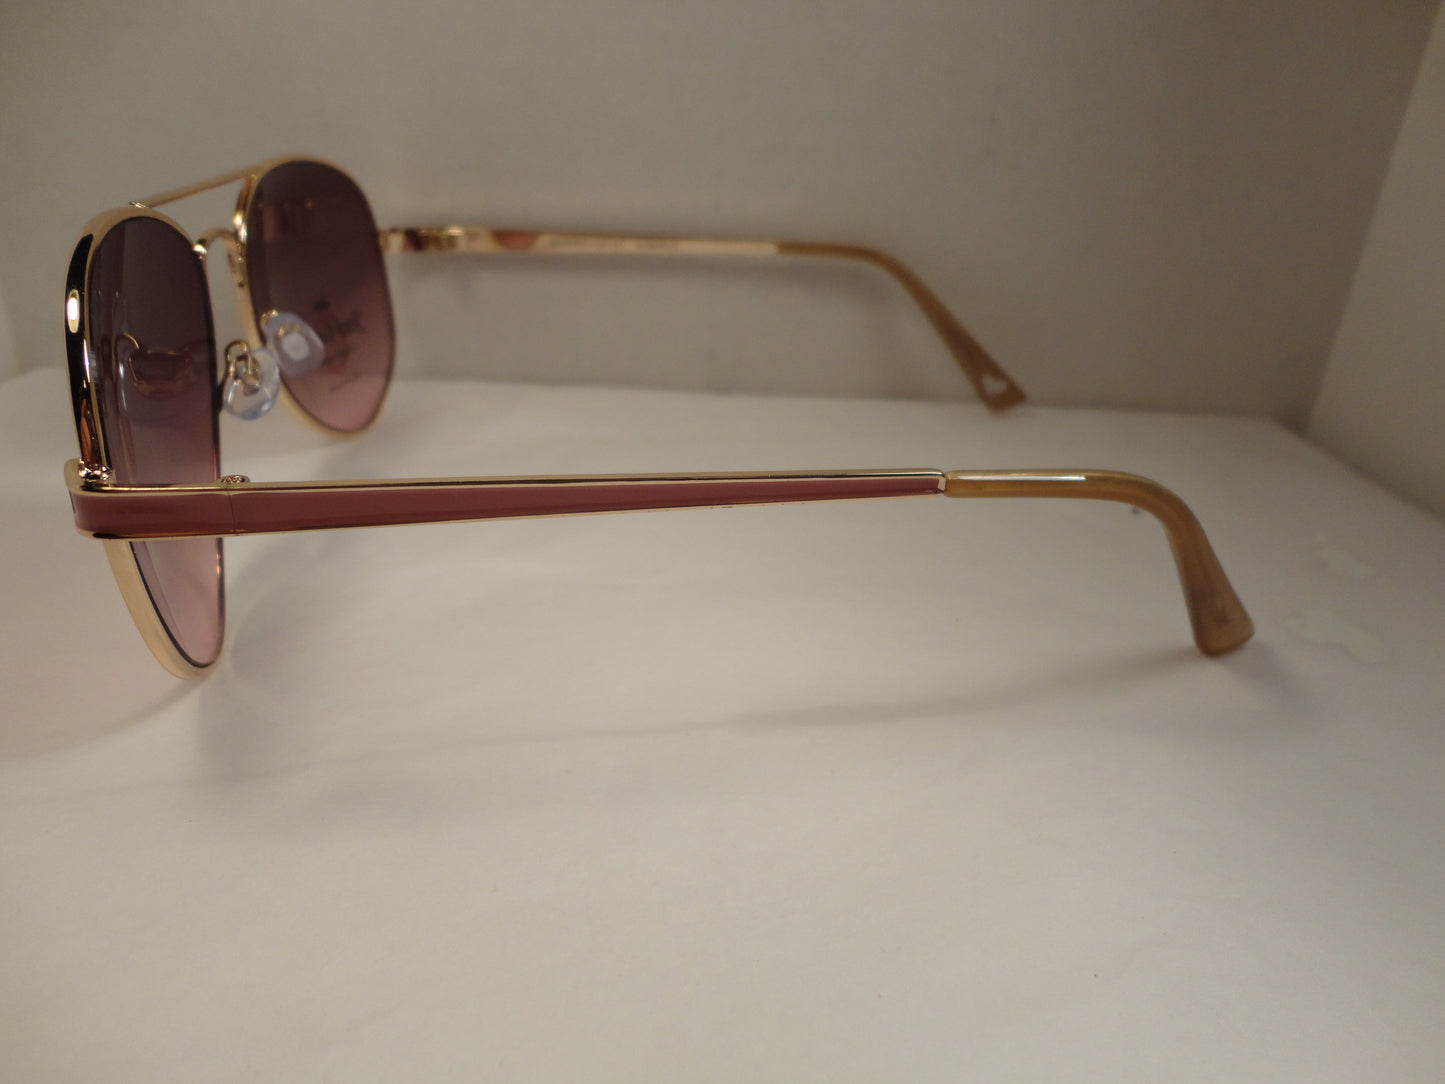 Juicy Couture Sunglasses Gold & Pink Frames NWT SKU 400-61